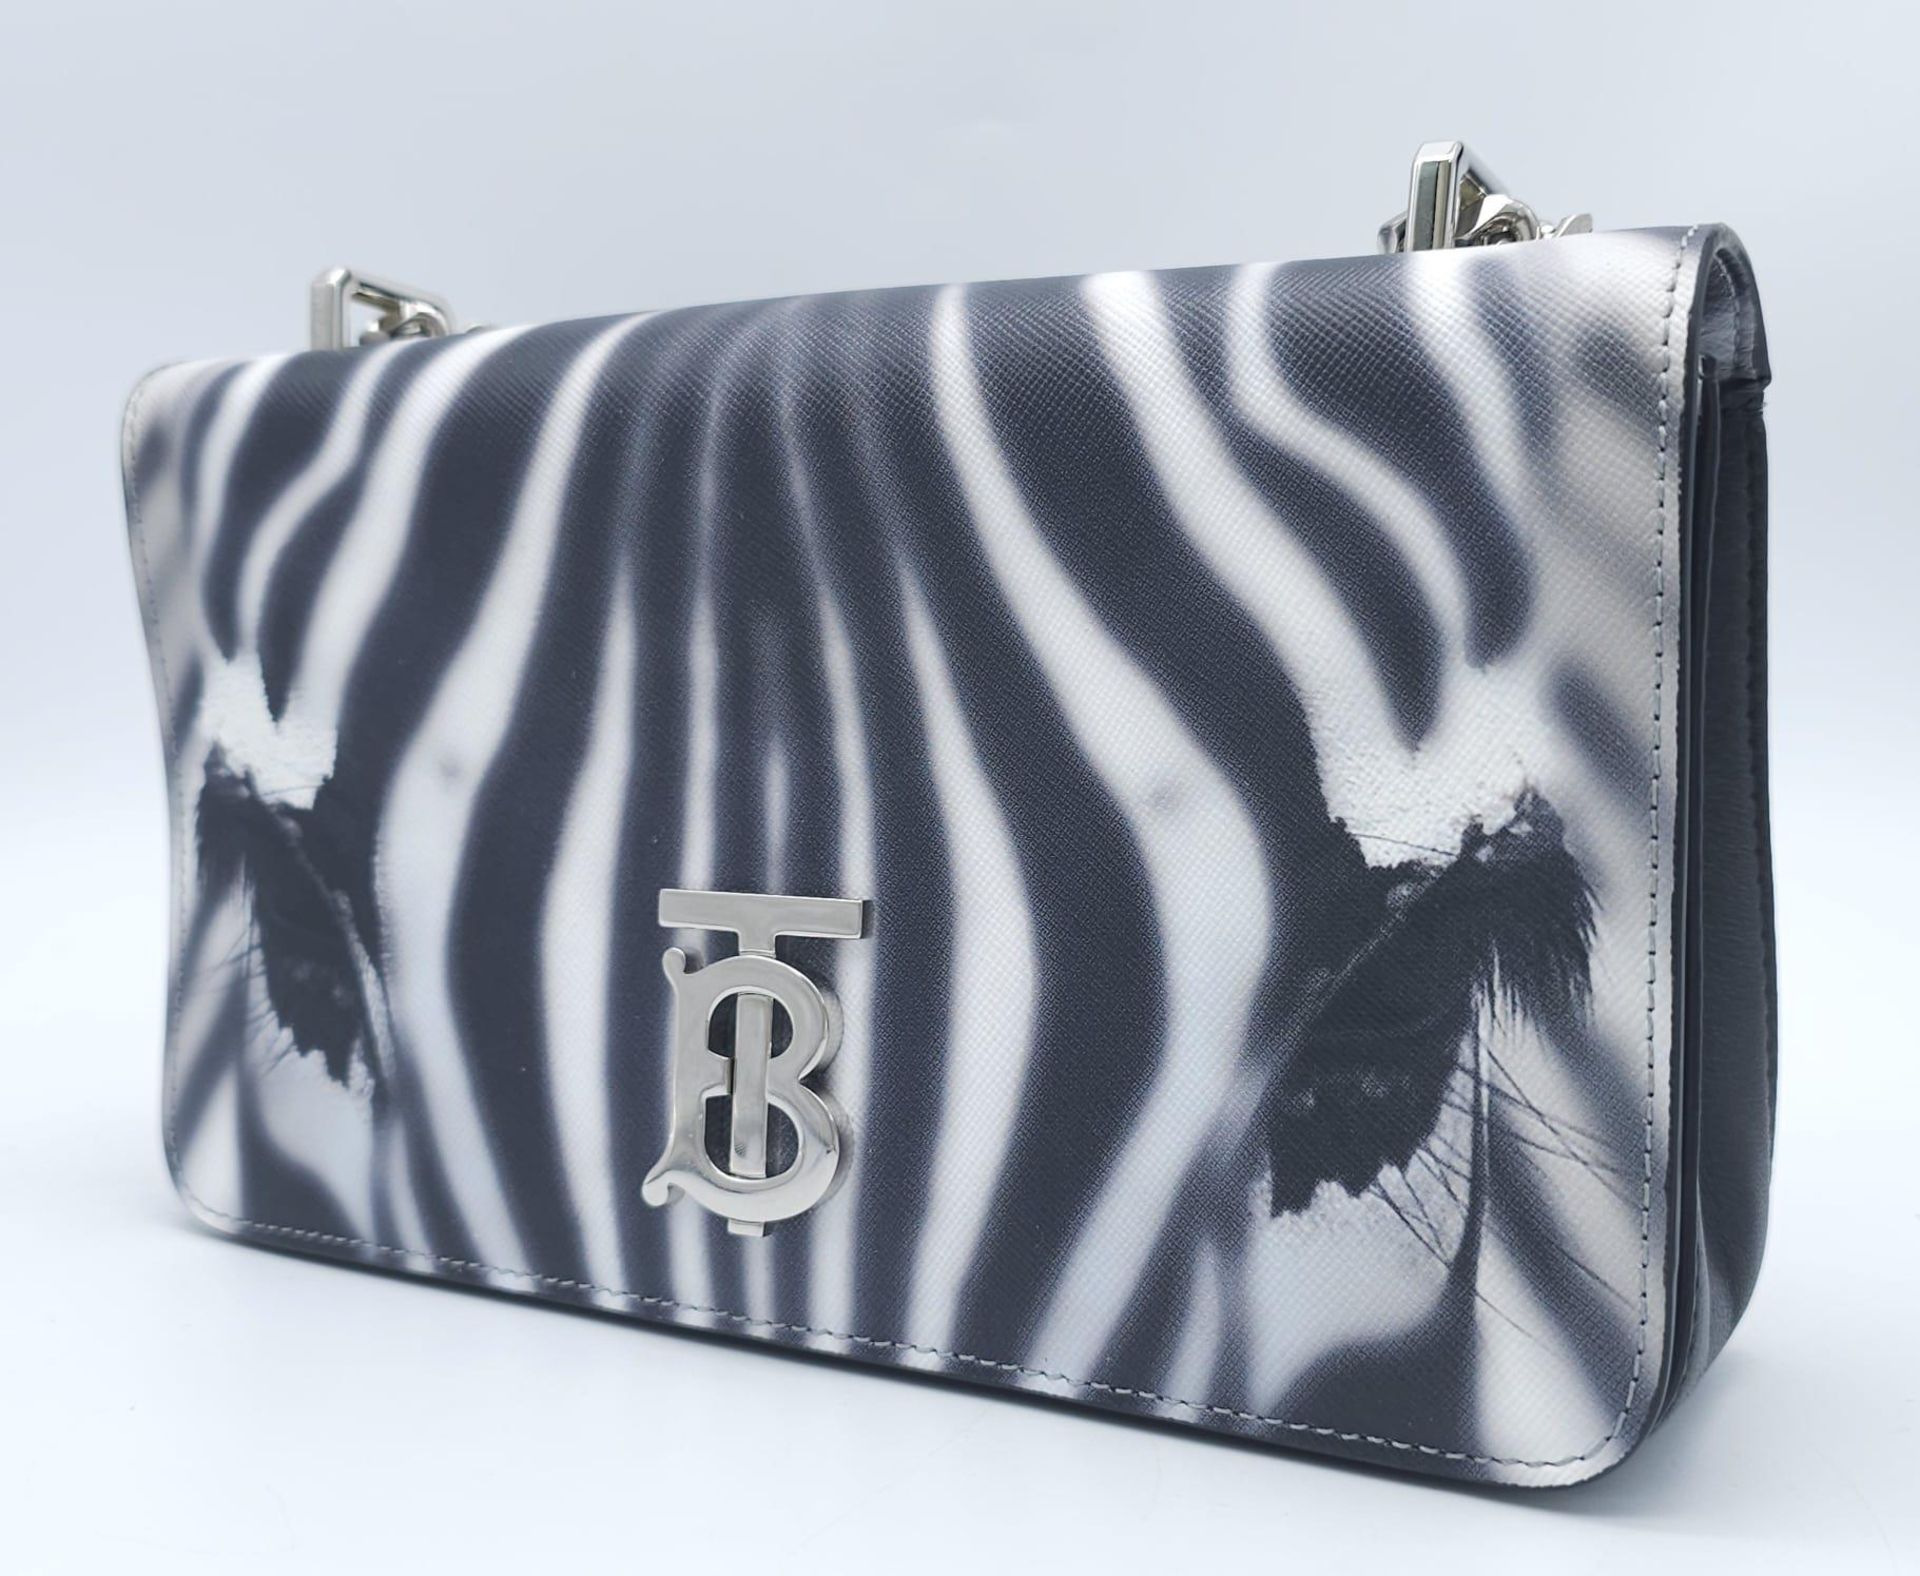 Burberry Zebra Chain Shoulder Bag. Quality leather throughout with a gorgeous print of a Zebra. - Bild 3 aus 13